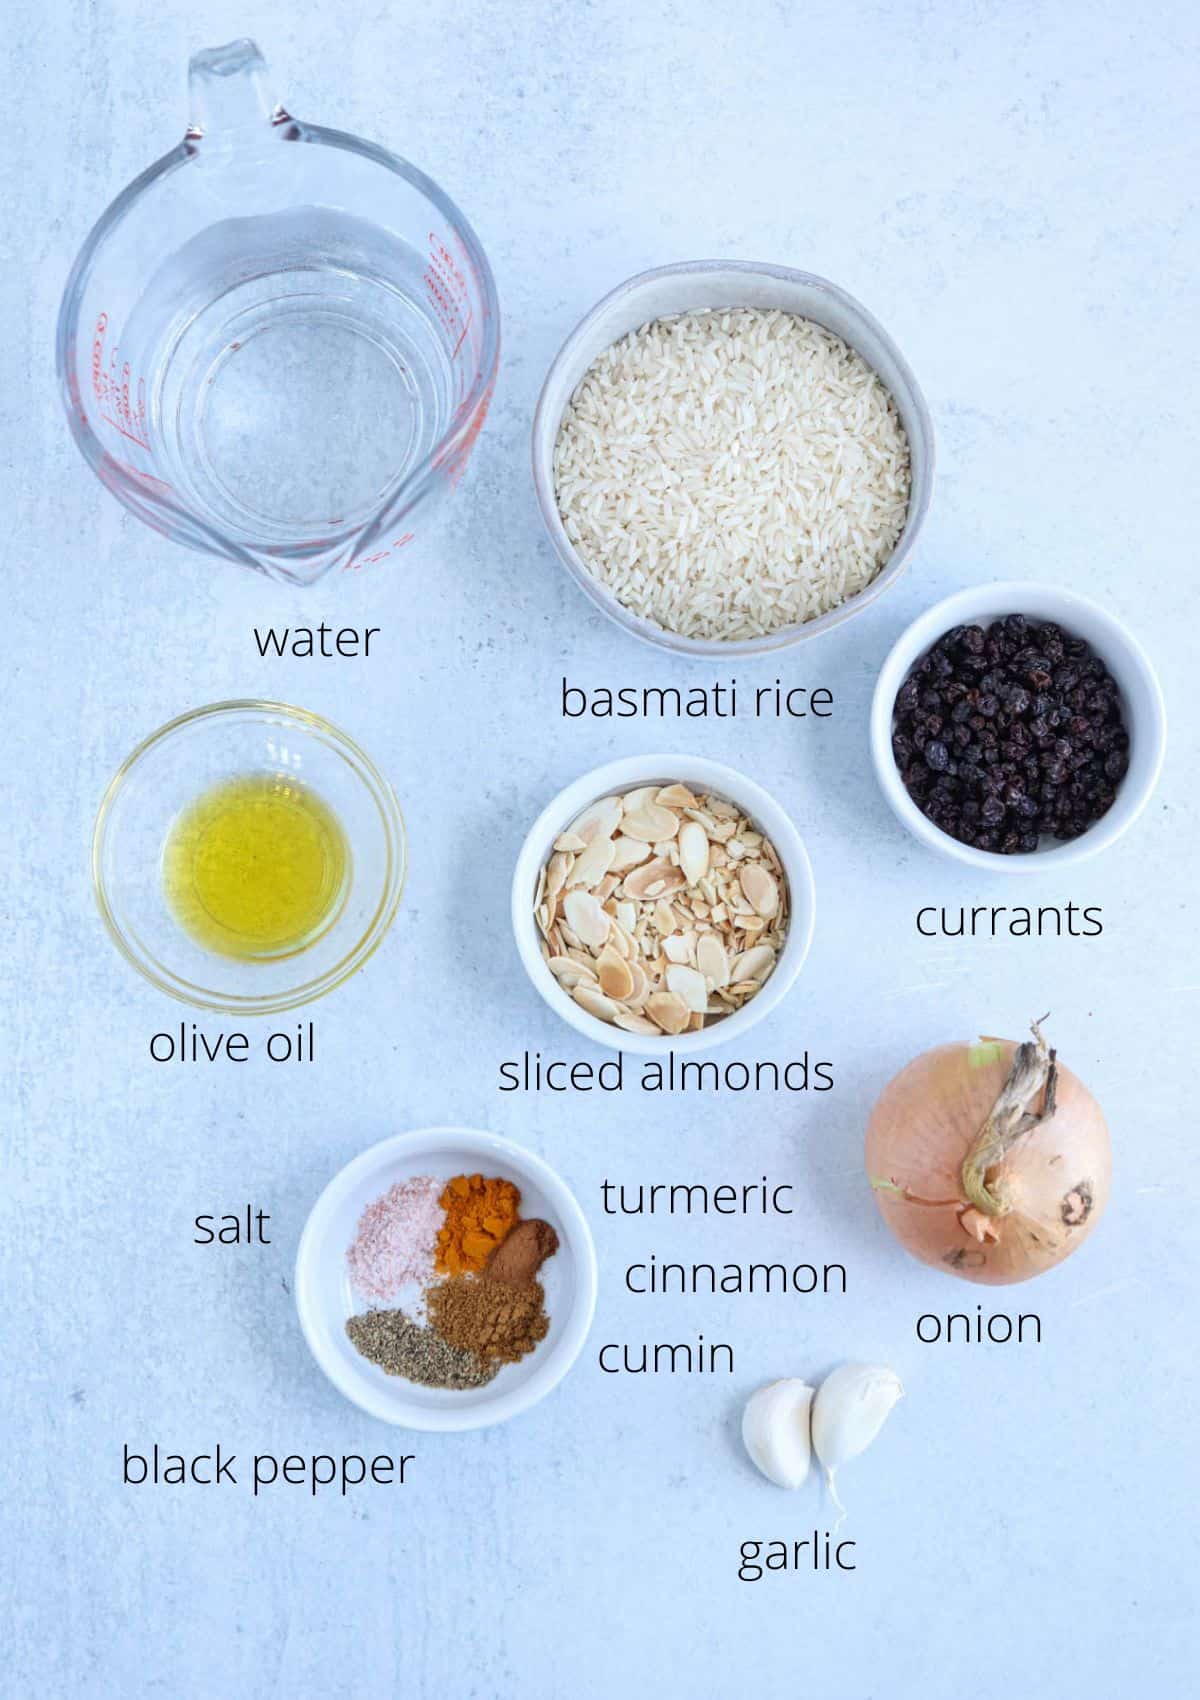 ingredients for making mediterranean yellow rice in round containers on gray surface with captions.